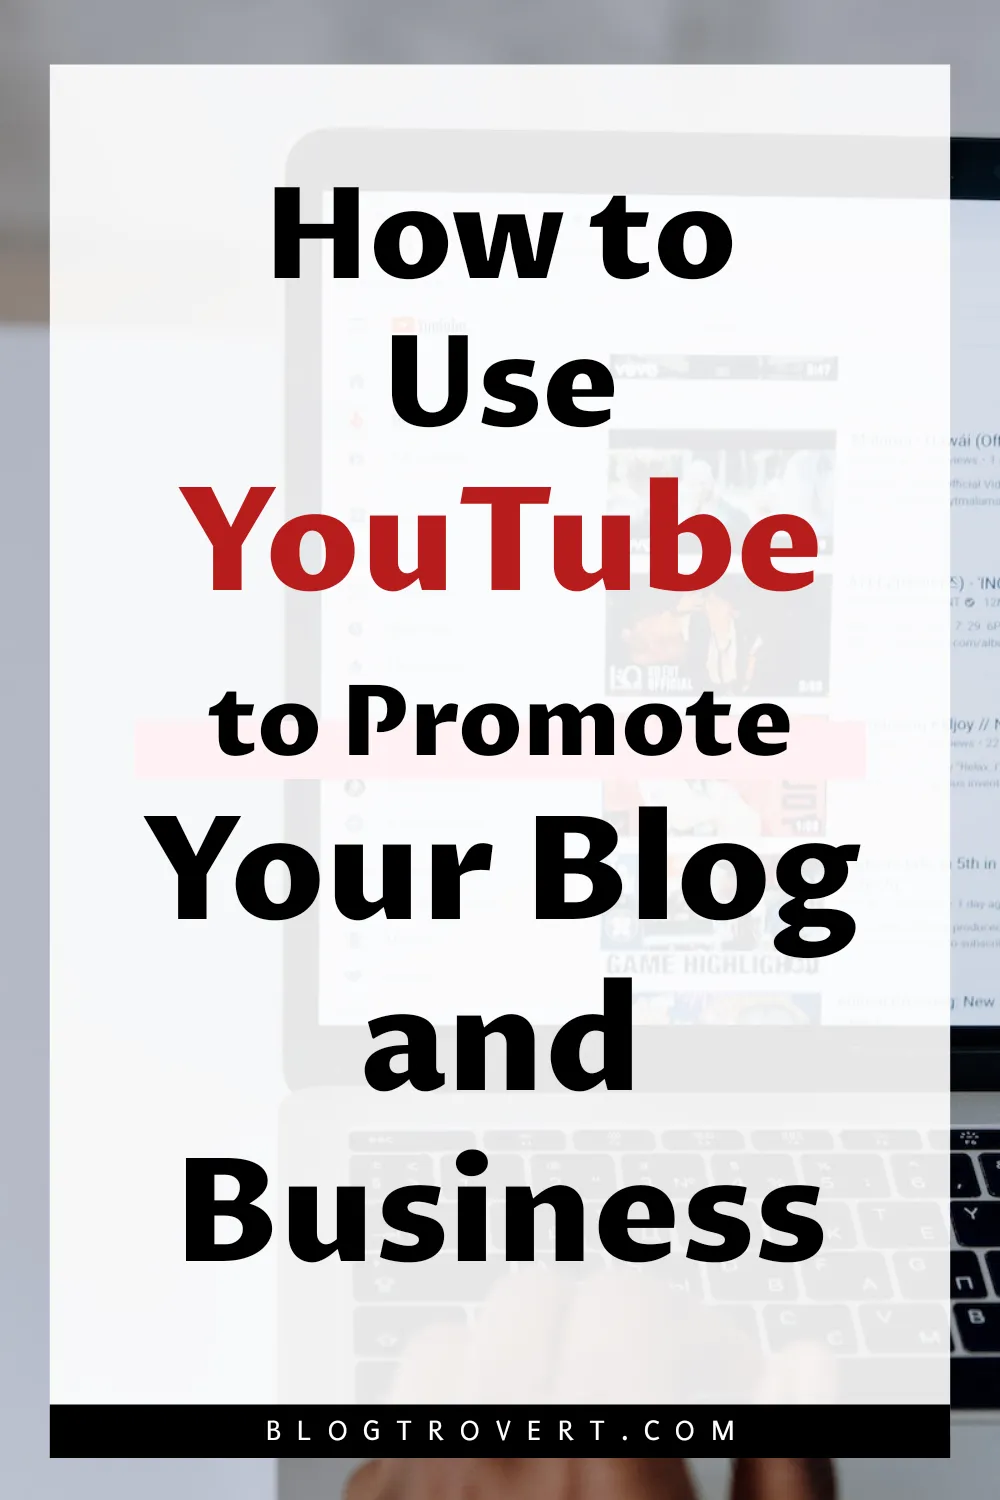 How to use YouTube to grow your business and blog effectively in [year] 1